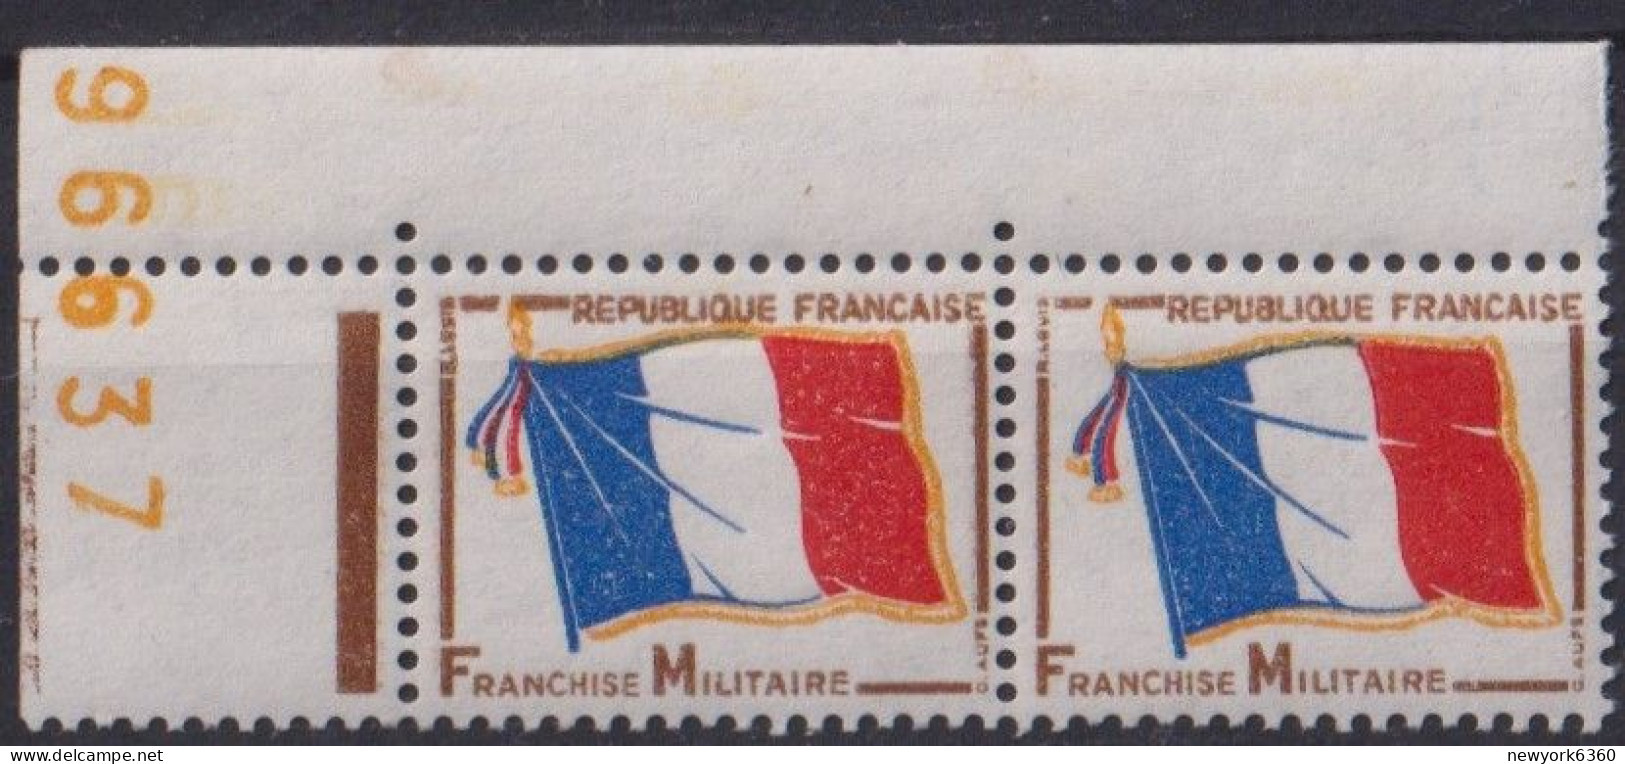 1964 FRANCE FRANCHISE MILITAIRE N** 13 MNH Paire - Military Postage Stamps